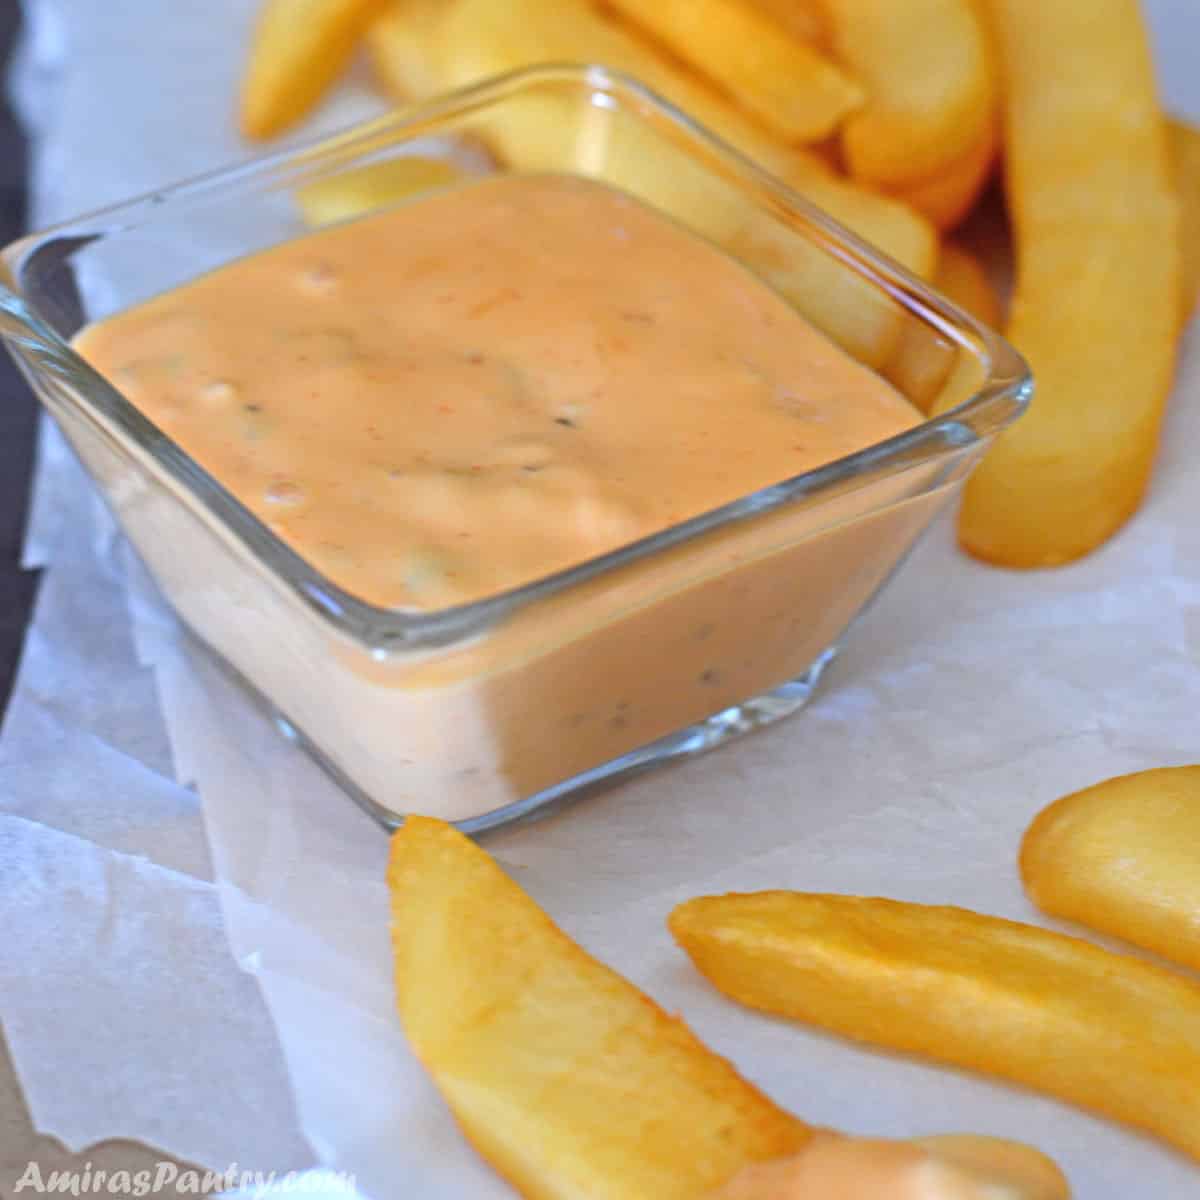 A small condiment bowl with big mac sauce with some fries.